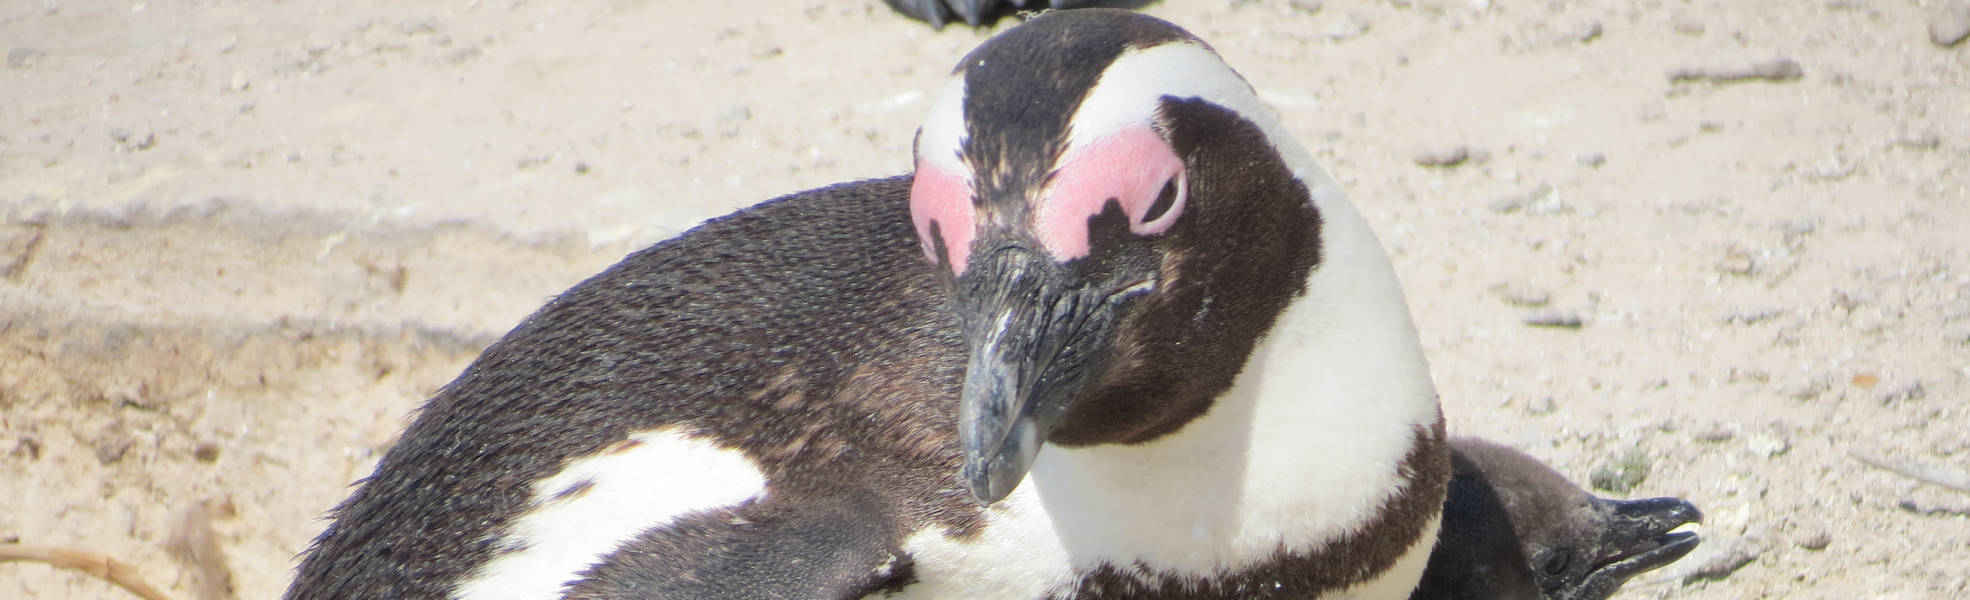 Volunteering at the Penguin Project in South Africa